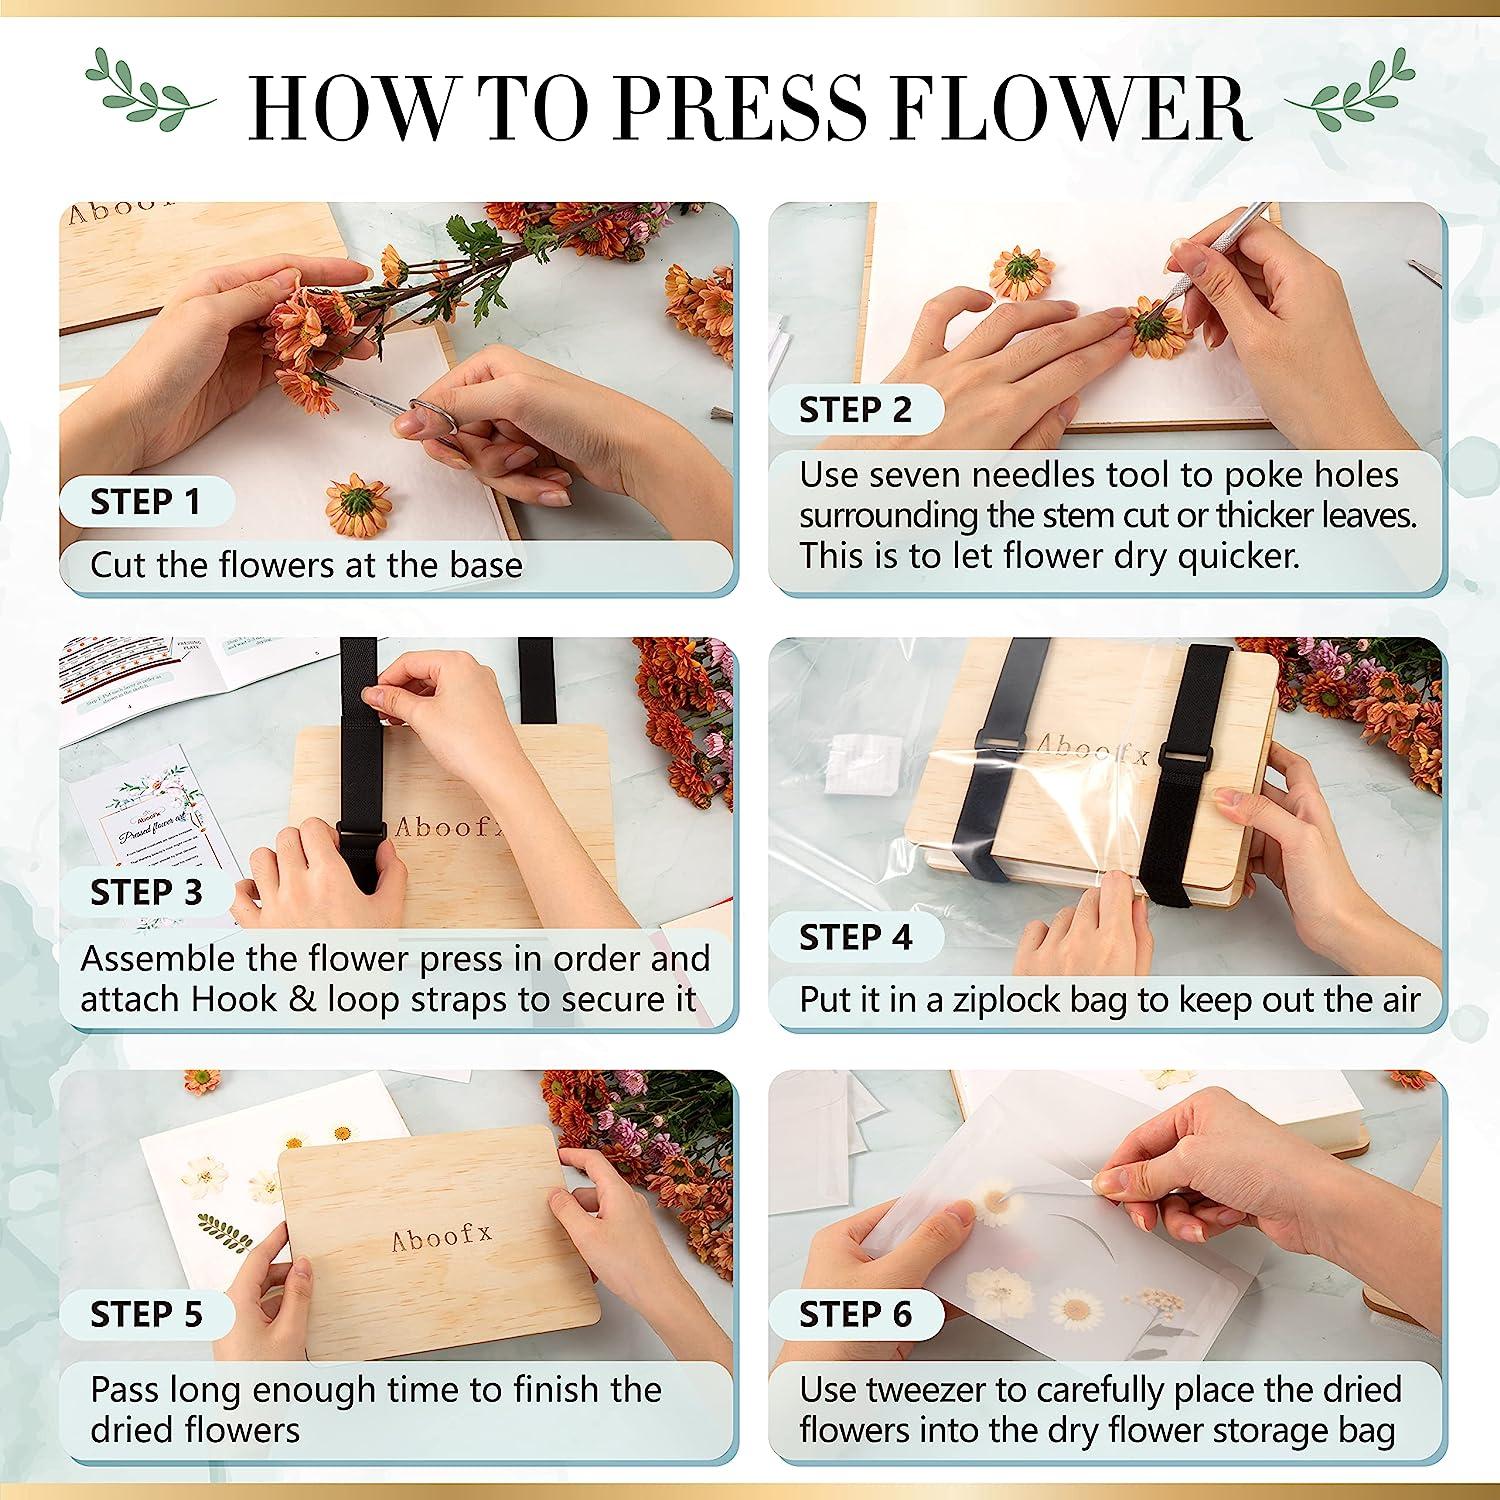 Aboofx Flower Press Kit, Large Wooden Flower Pressing Kit for Adults Kids,  6 Layers 6.3 x 8.3 Inch Flower Press Leaf Pressing Kit to Making Dried